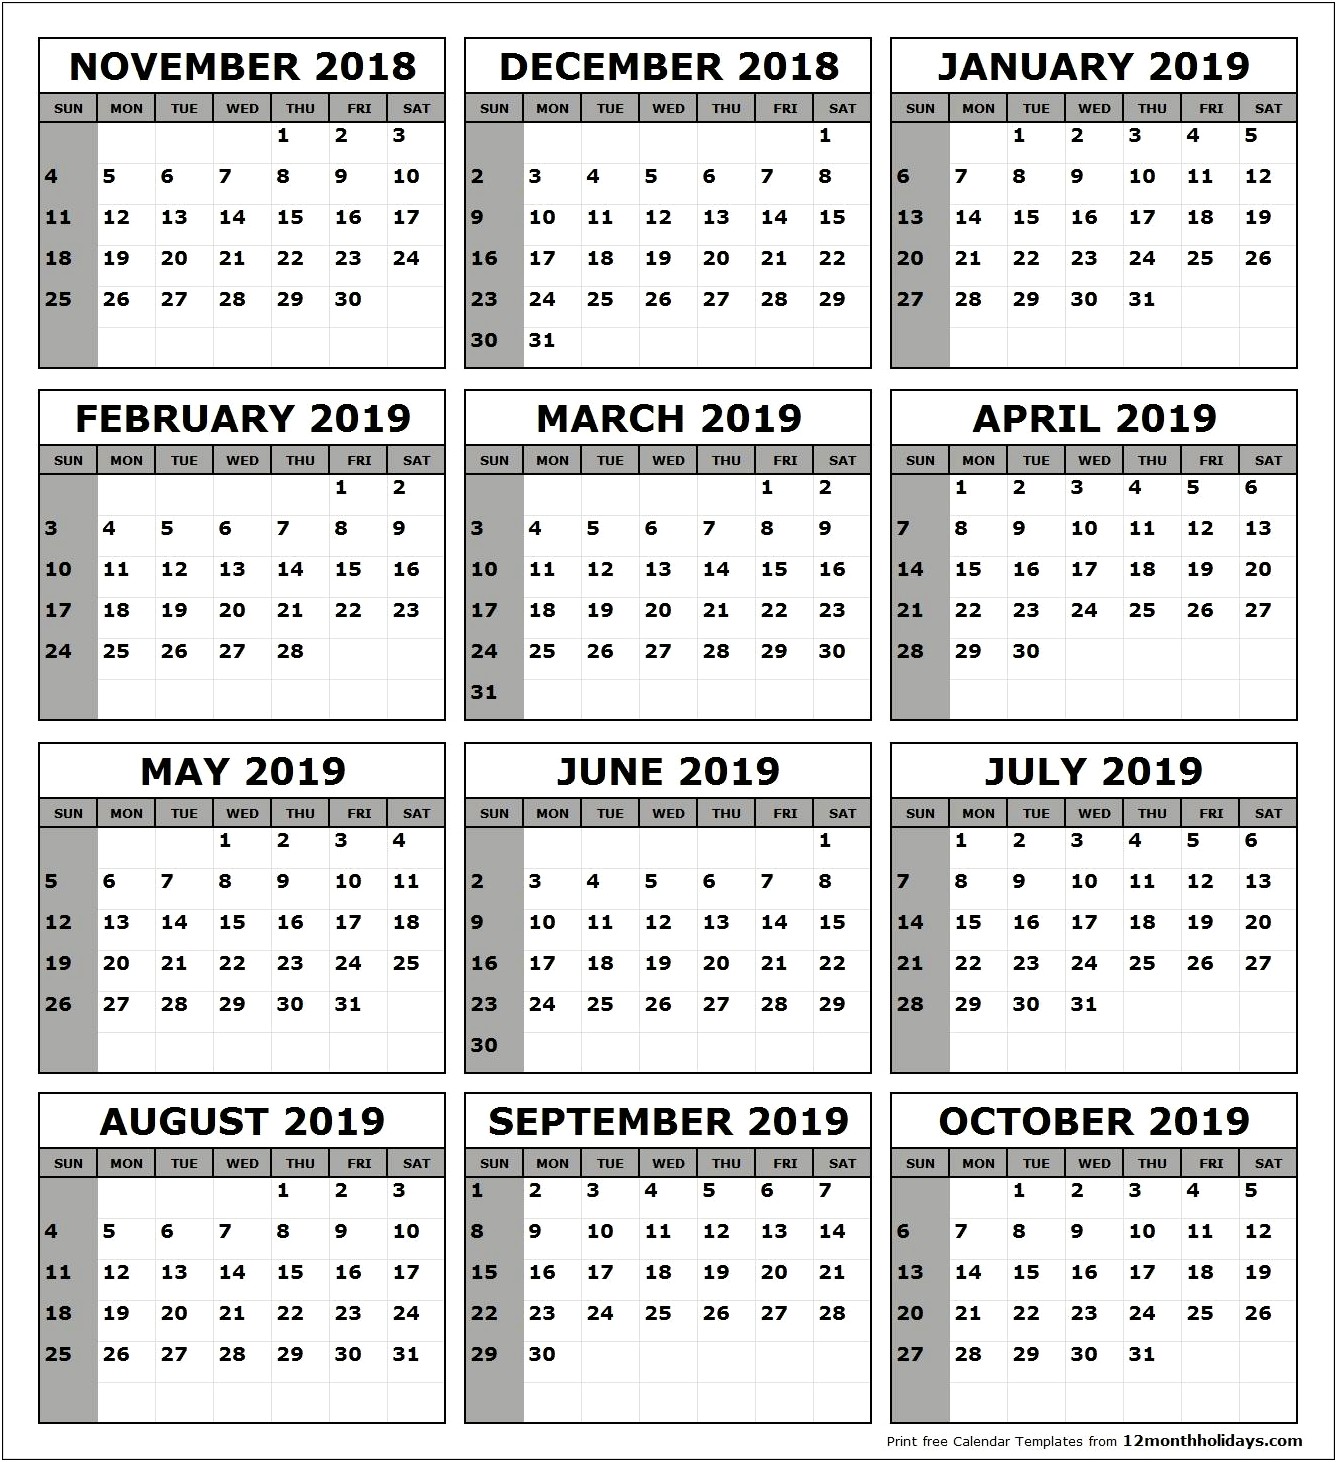 2018 Free Calendar Template With Holidays